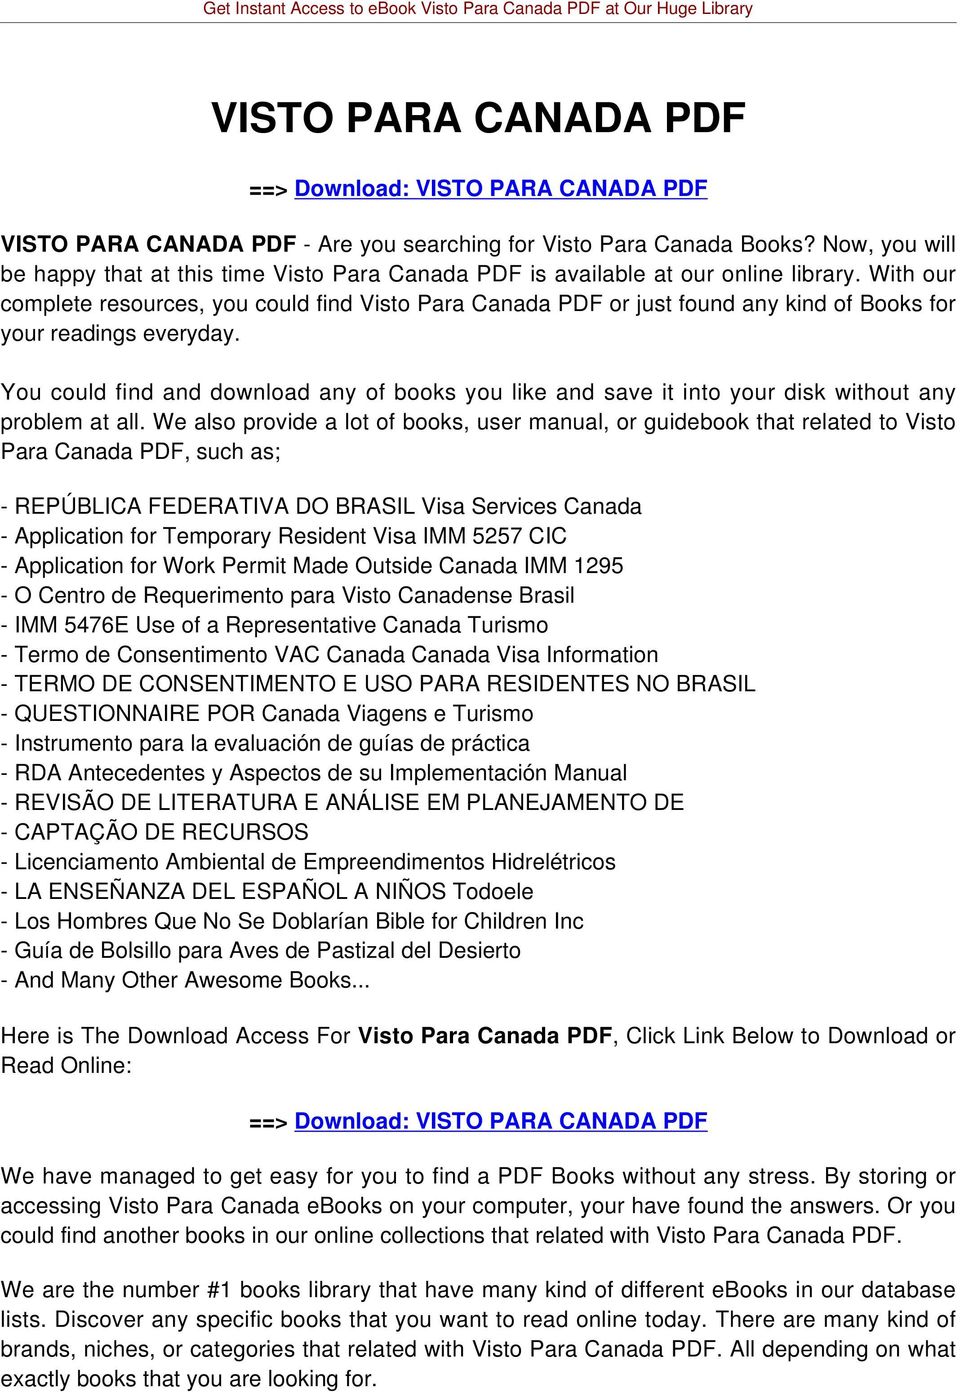 With our complete resources, you could find Visto Para Canada PDF or just found any kind of Books for your readings everyday.